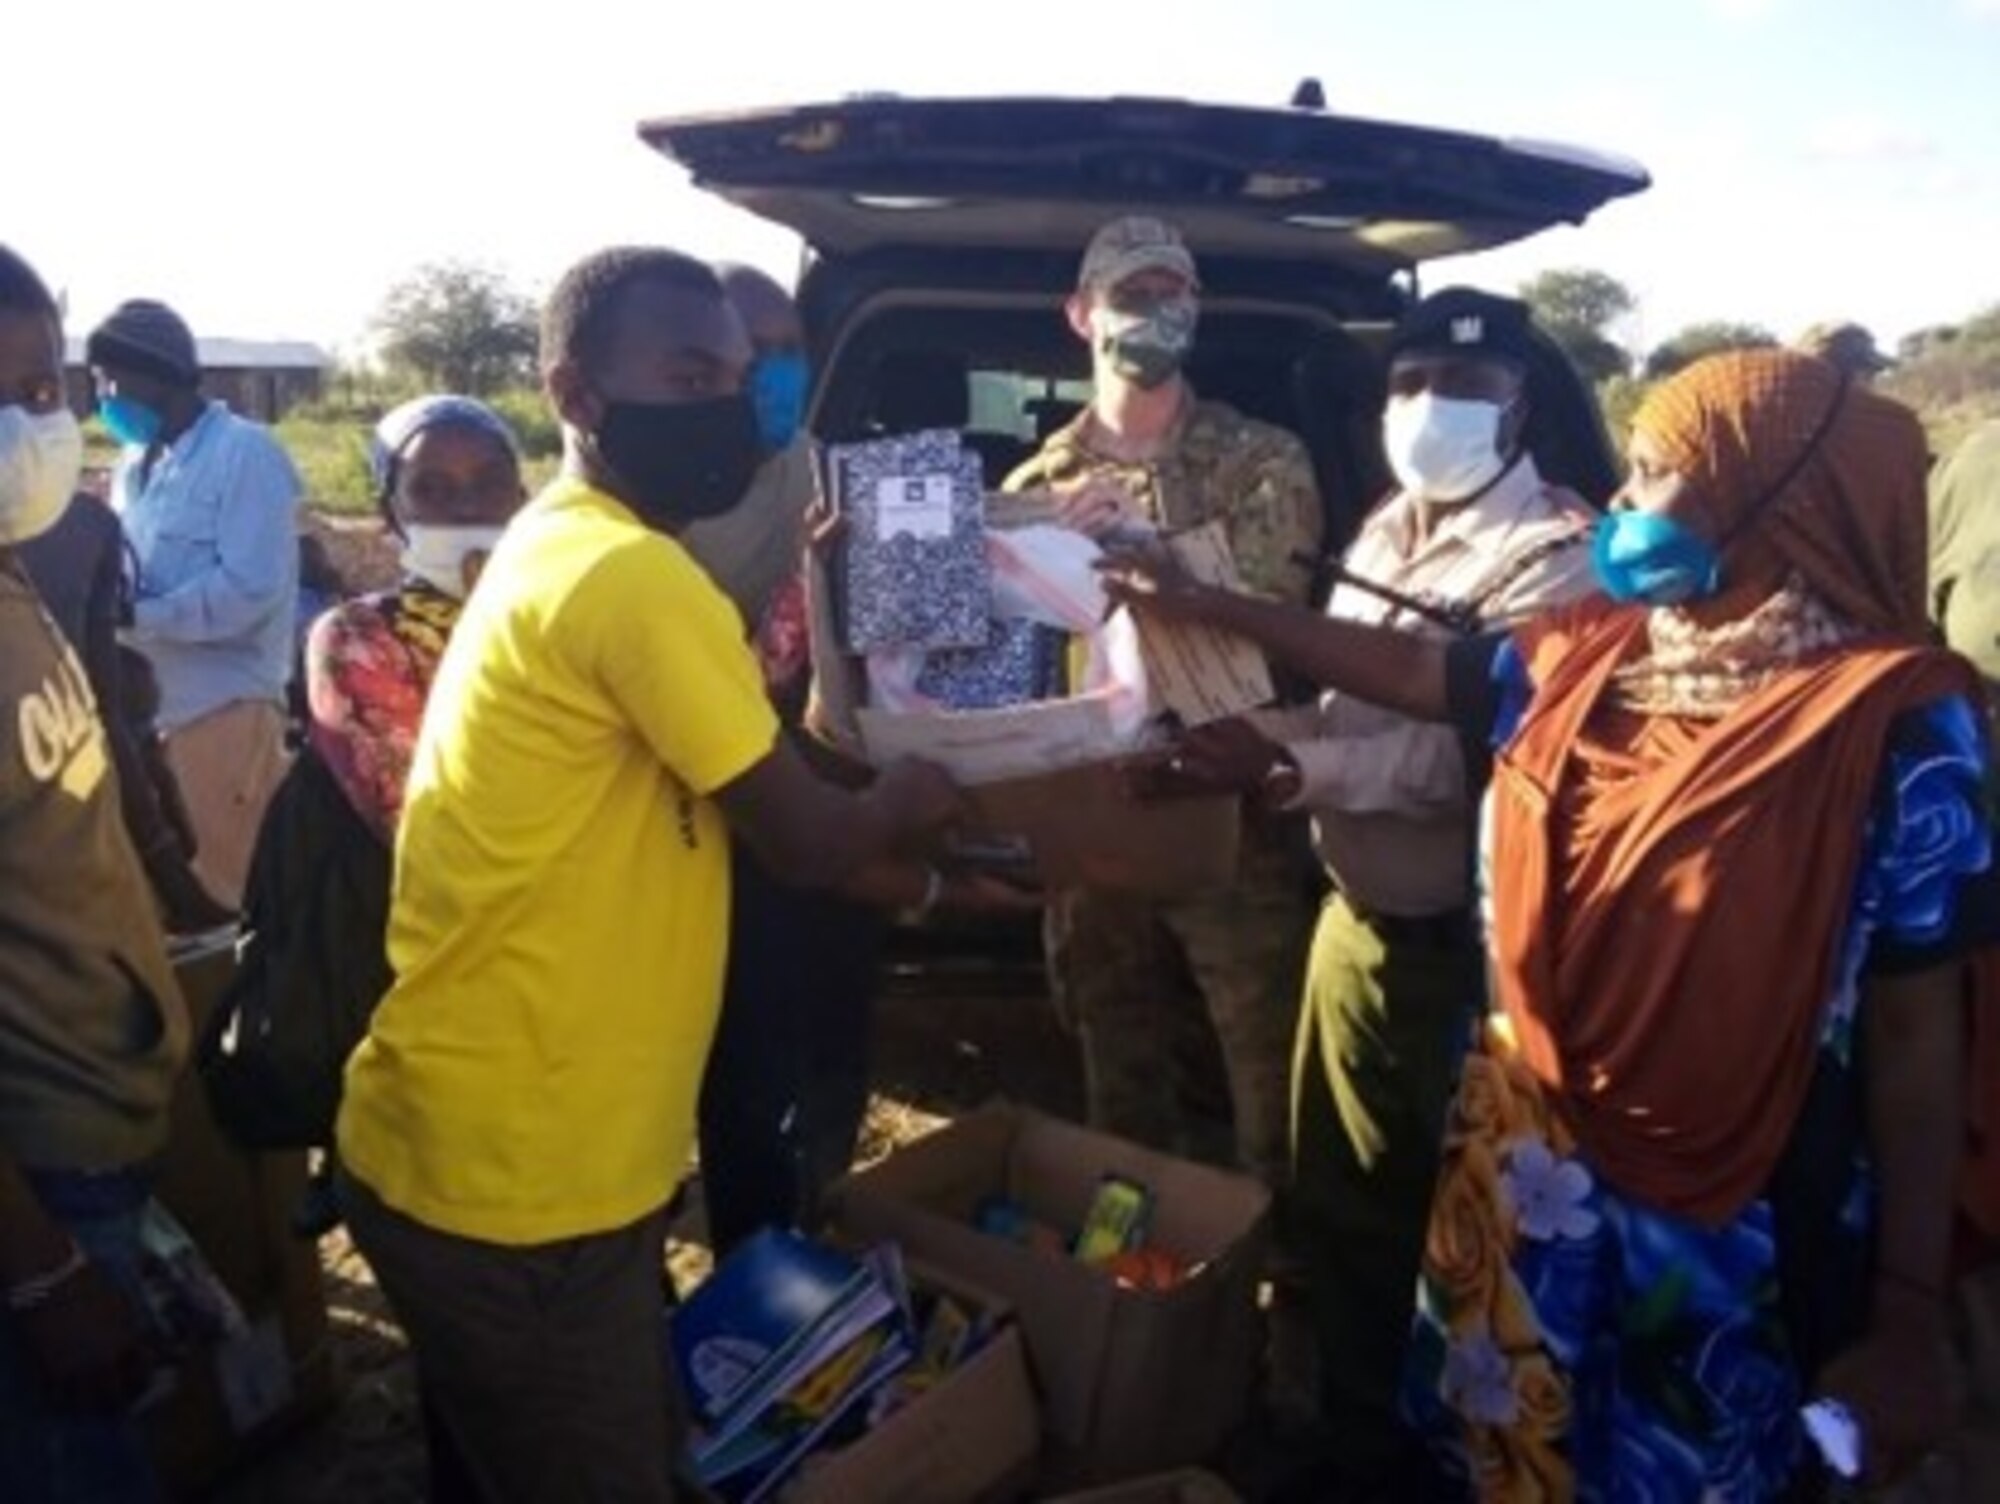 U.S. Air Force Capt. Ian Latham, 475th Expeditionary Air Base Squadron deputy force commander, presents school supplies for the teachers to gift to students when school opens back up in Magogoni Village at Manda Bay, Kenya, Nov. 6, 2020.